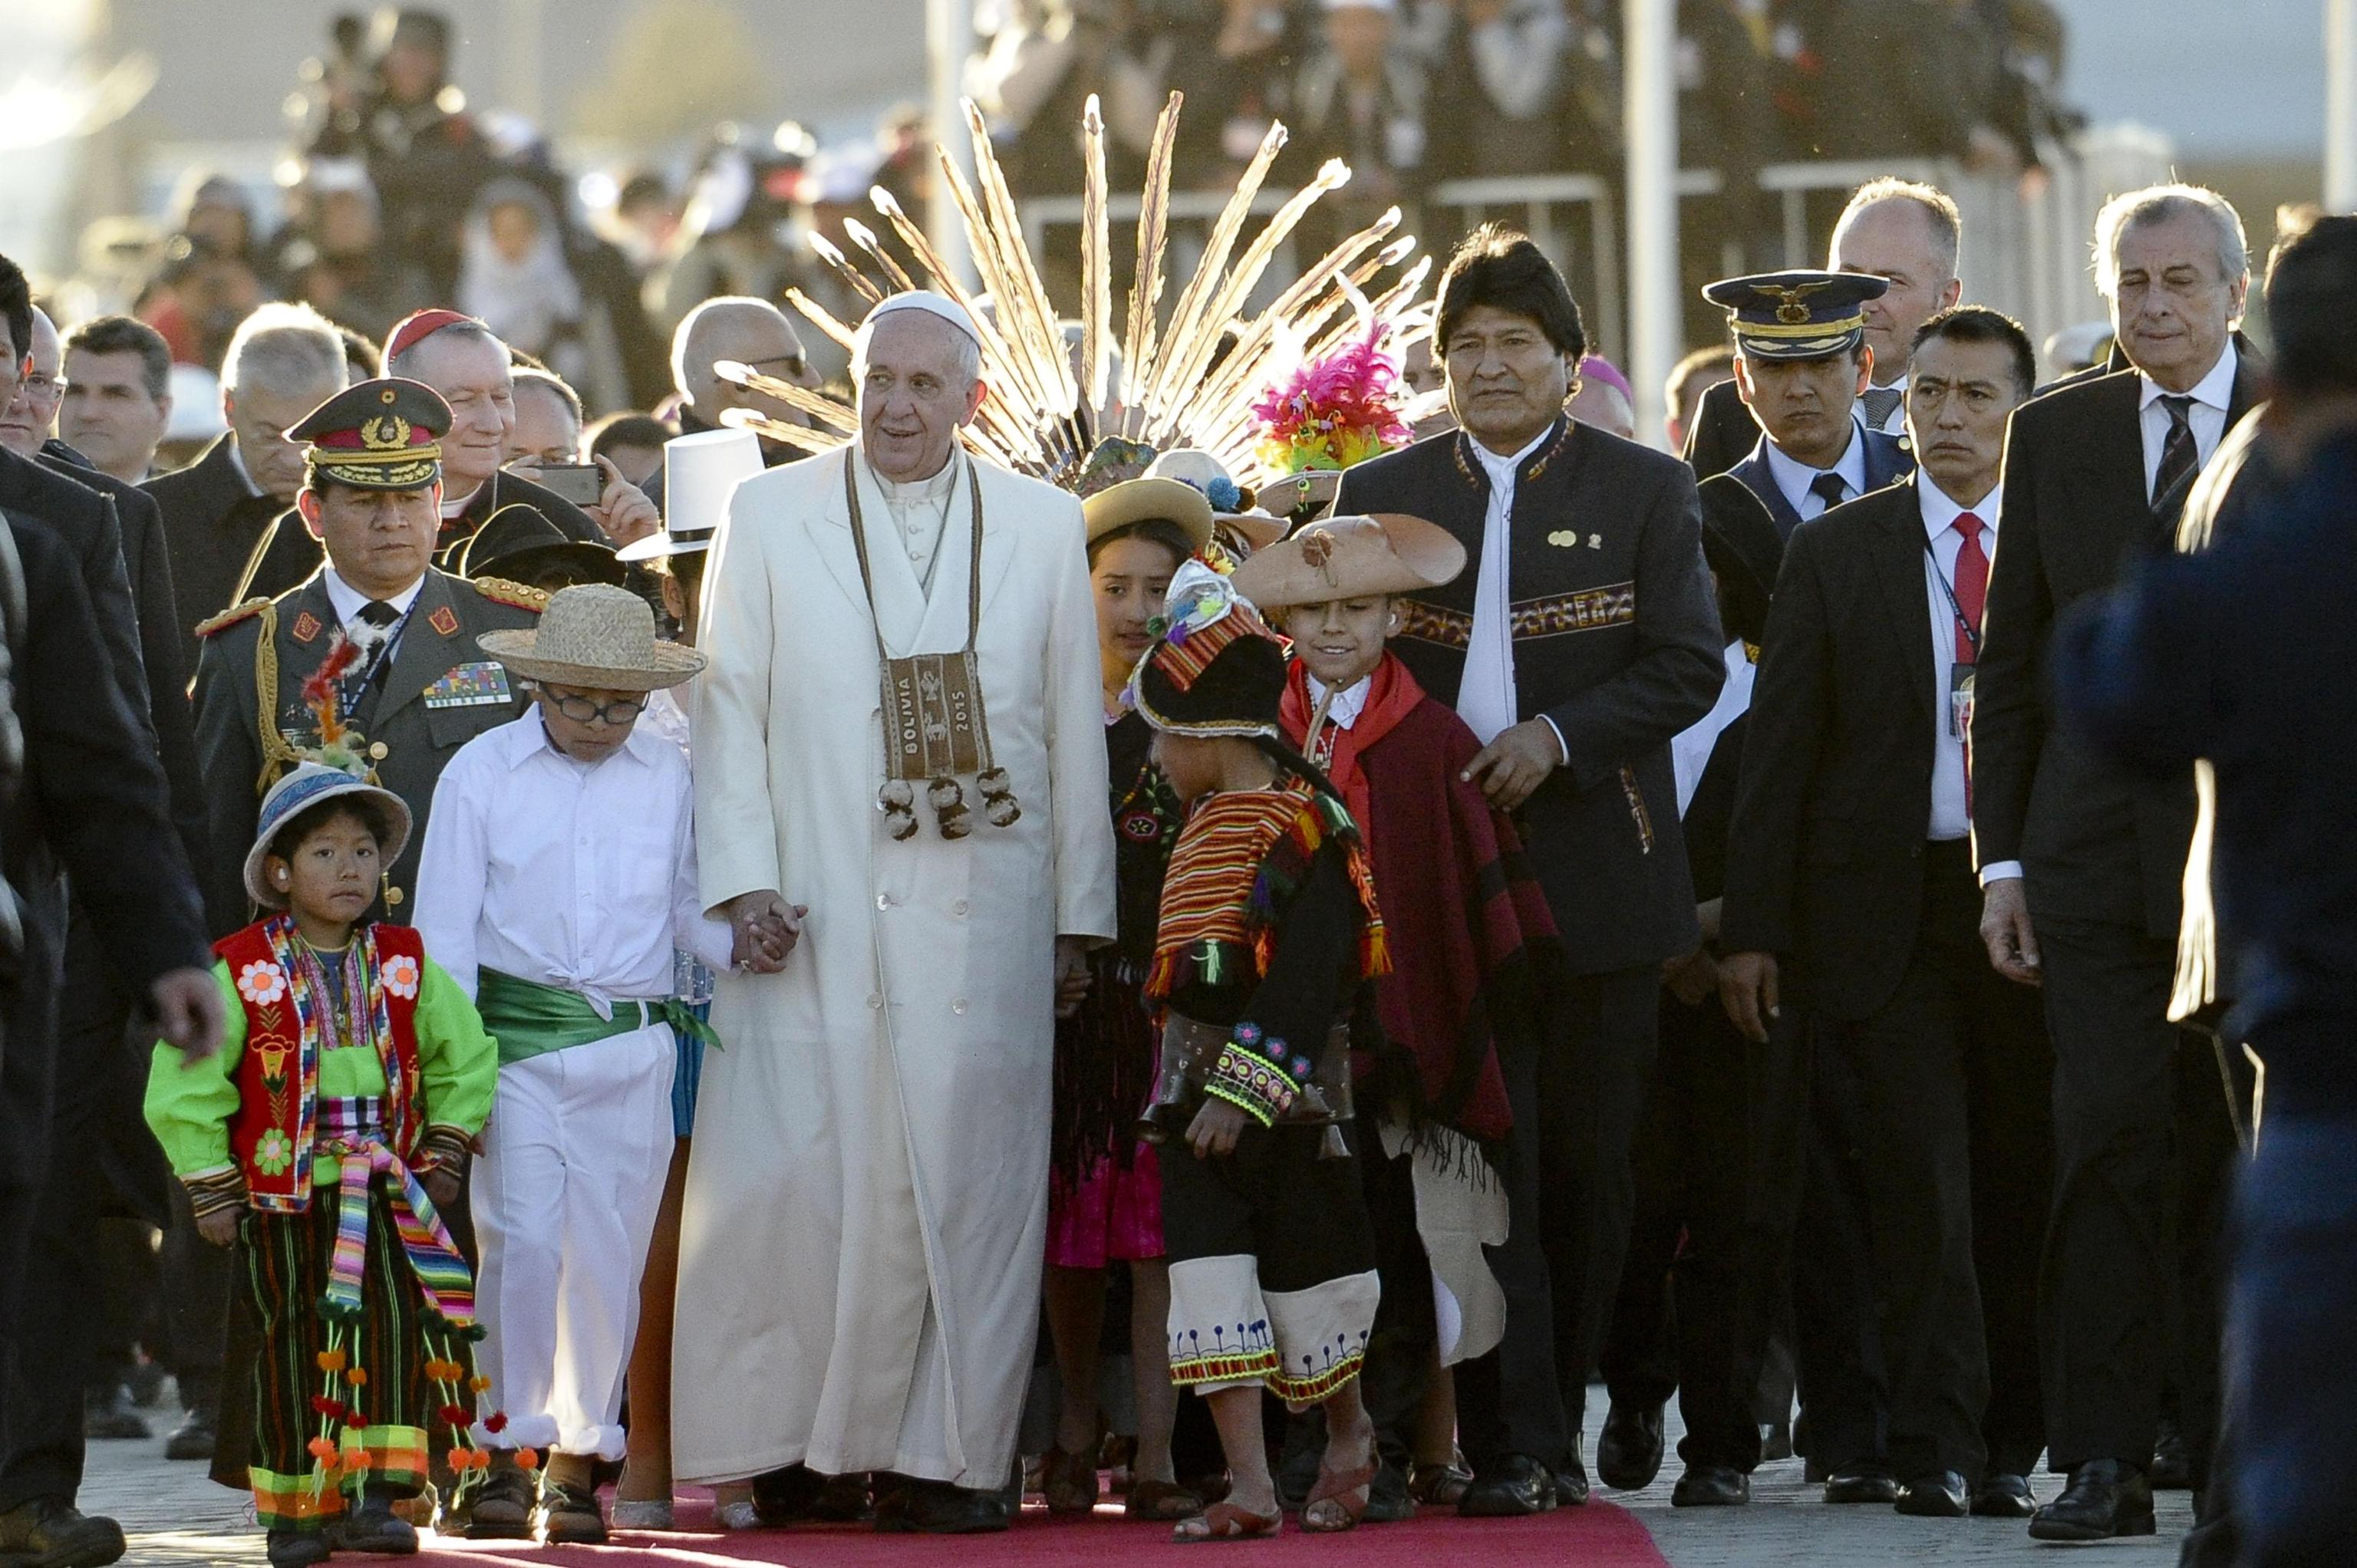 Pope Francis being greeted by children at his arrival at the El Alto International Airport